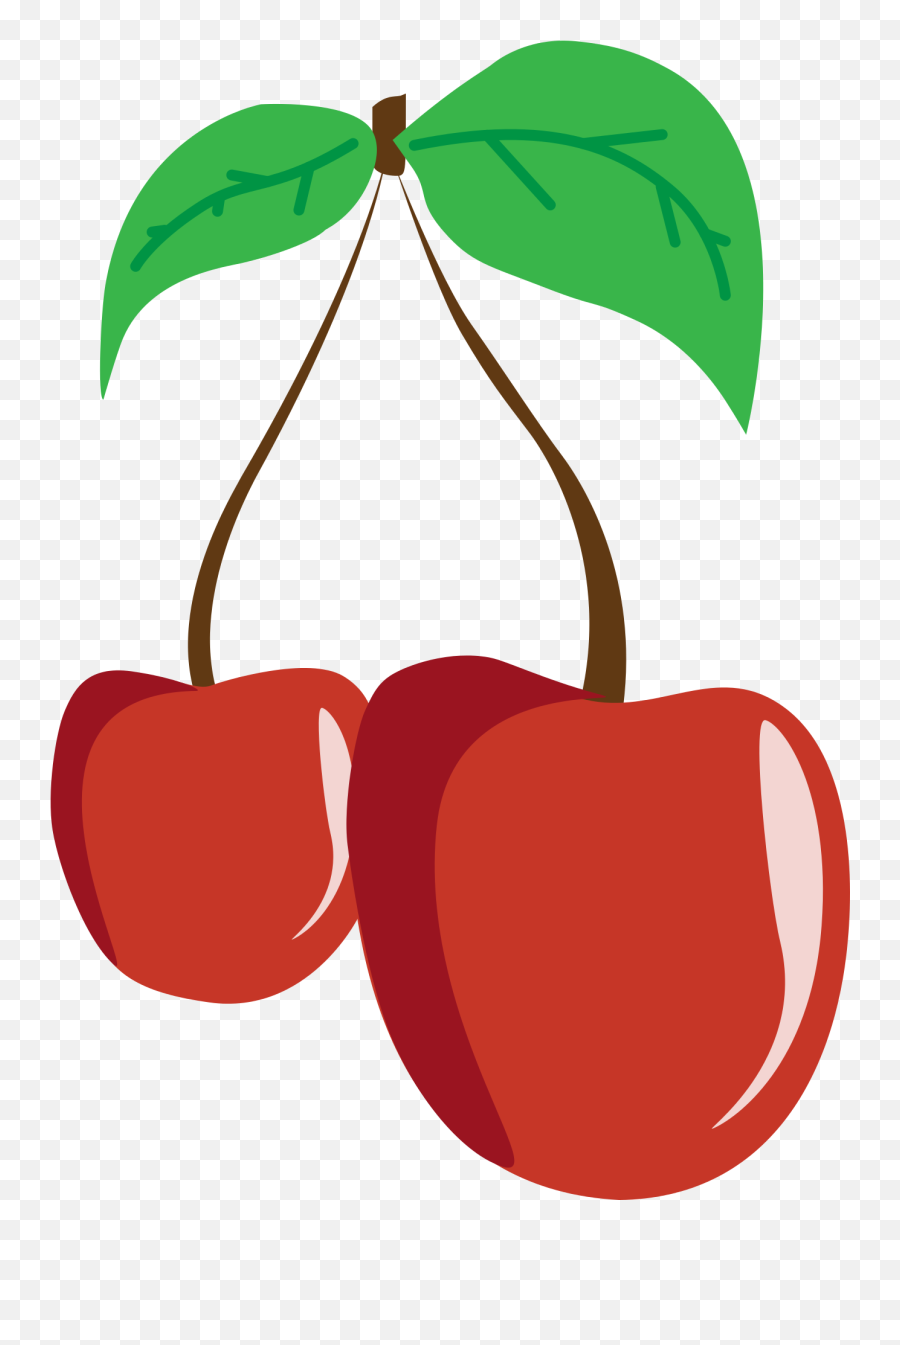 Drawing Of A Red Cherry With Green Leaves - Animasi Gambar Buah Cherry Png,Cherry Transparent Background